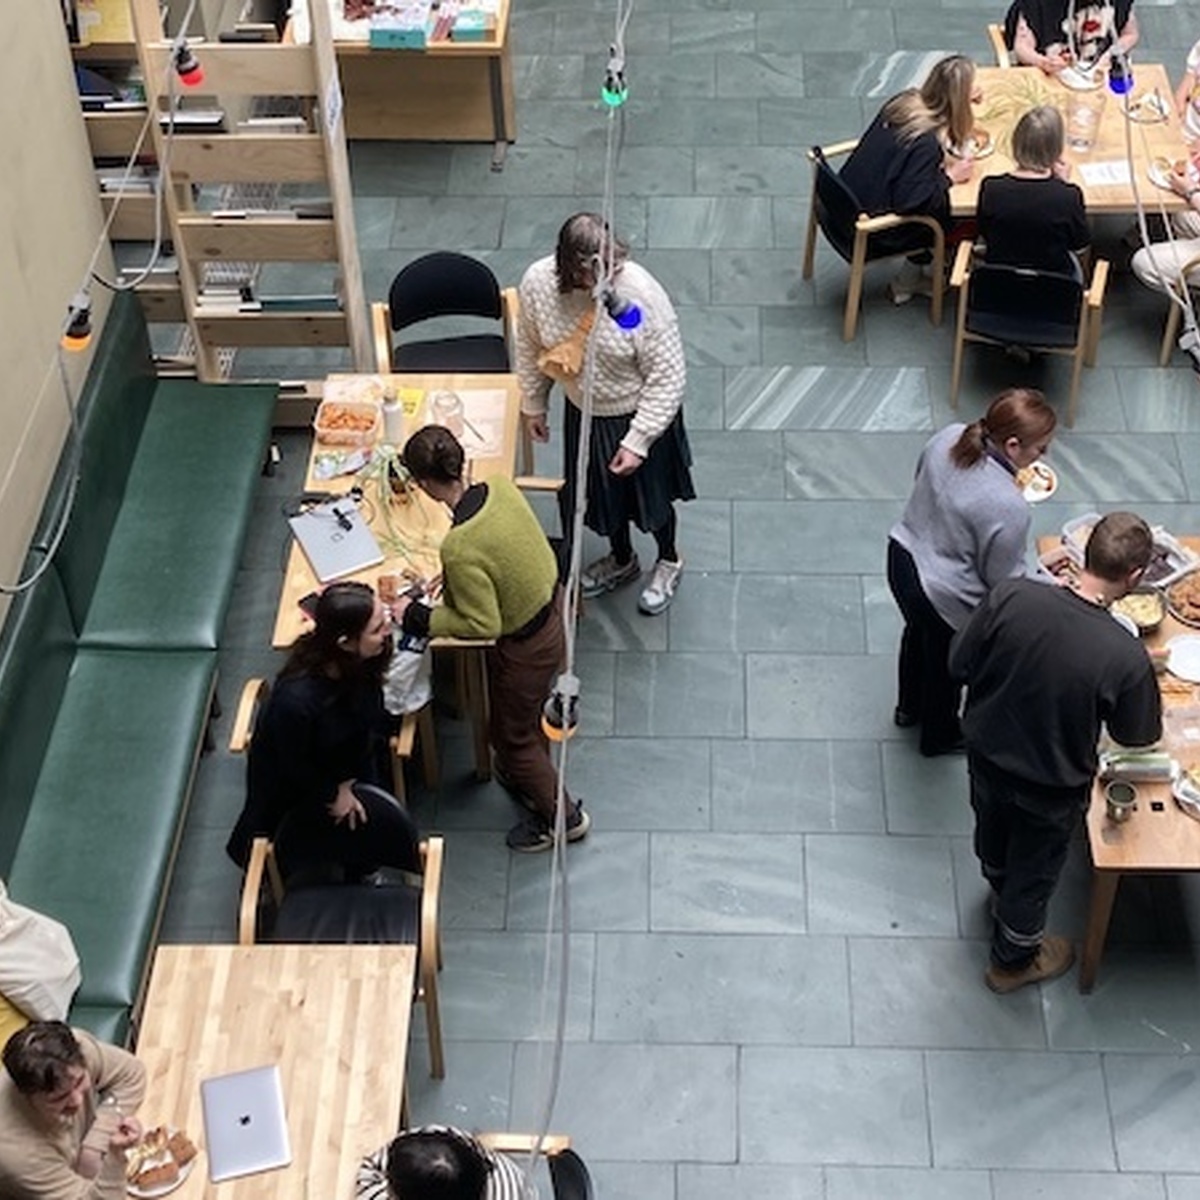 A picture taken from above of CCA's Courtyard, there are several people sitting and standing around tables.